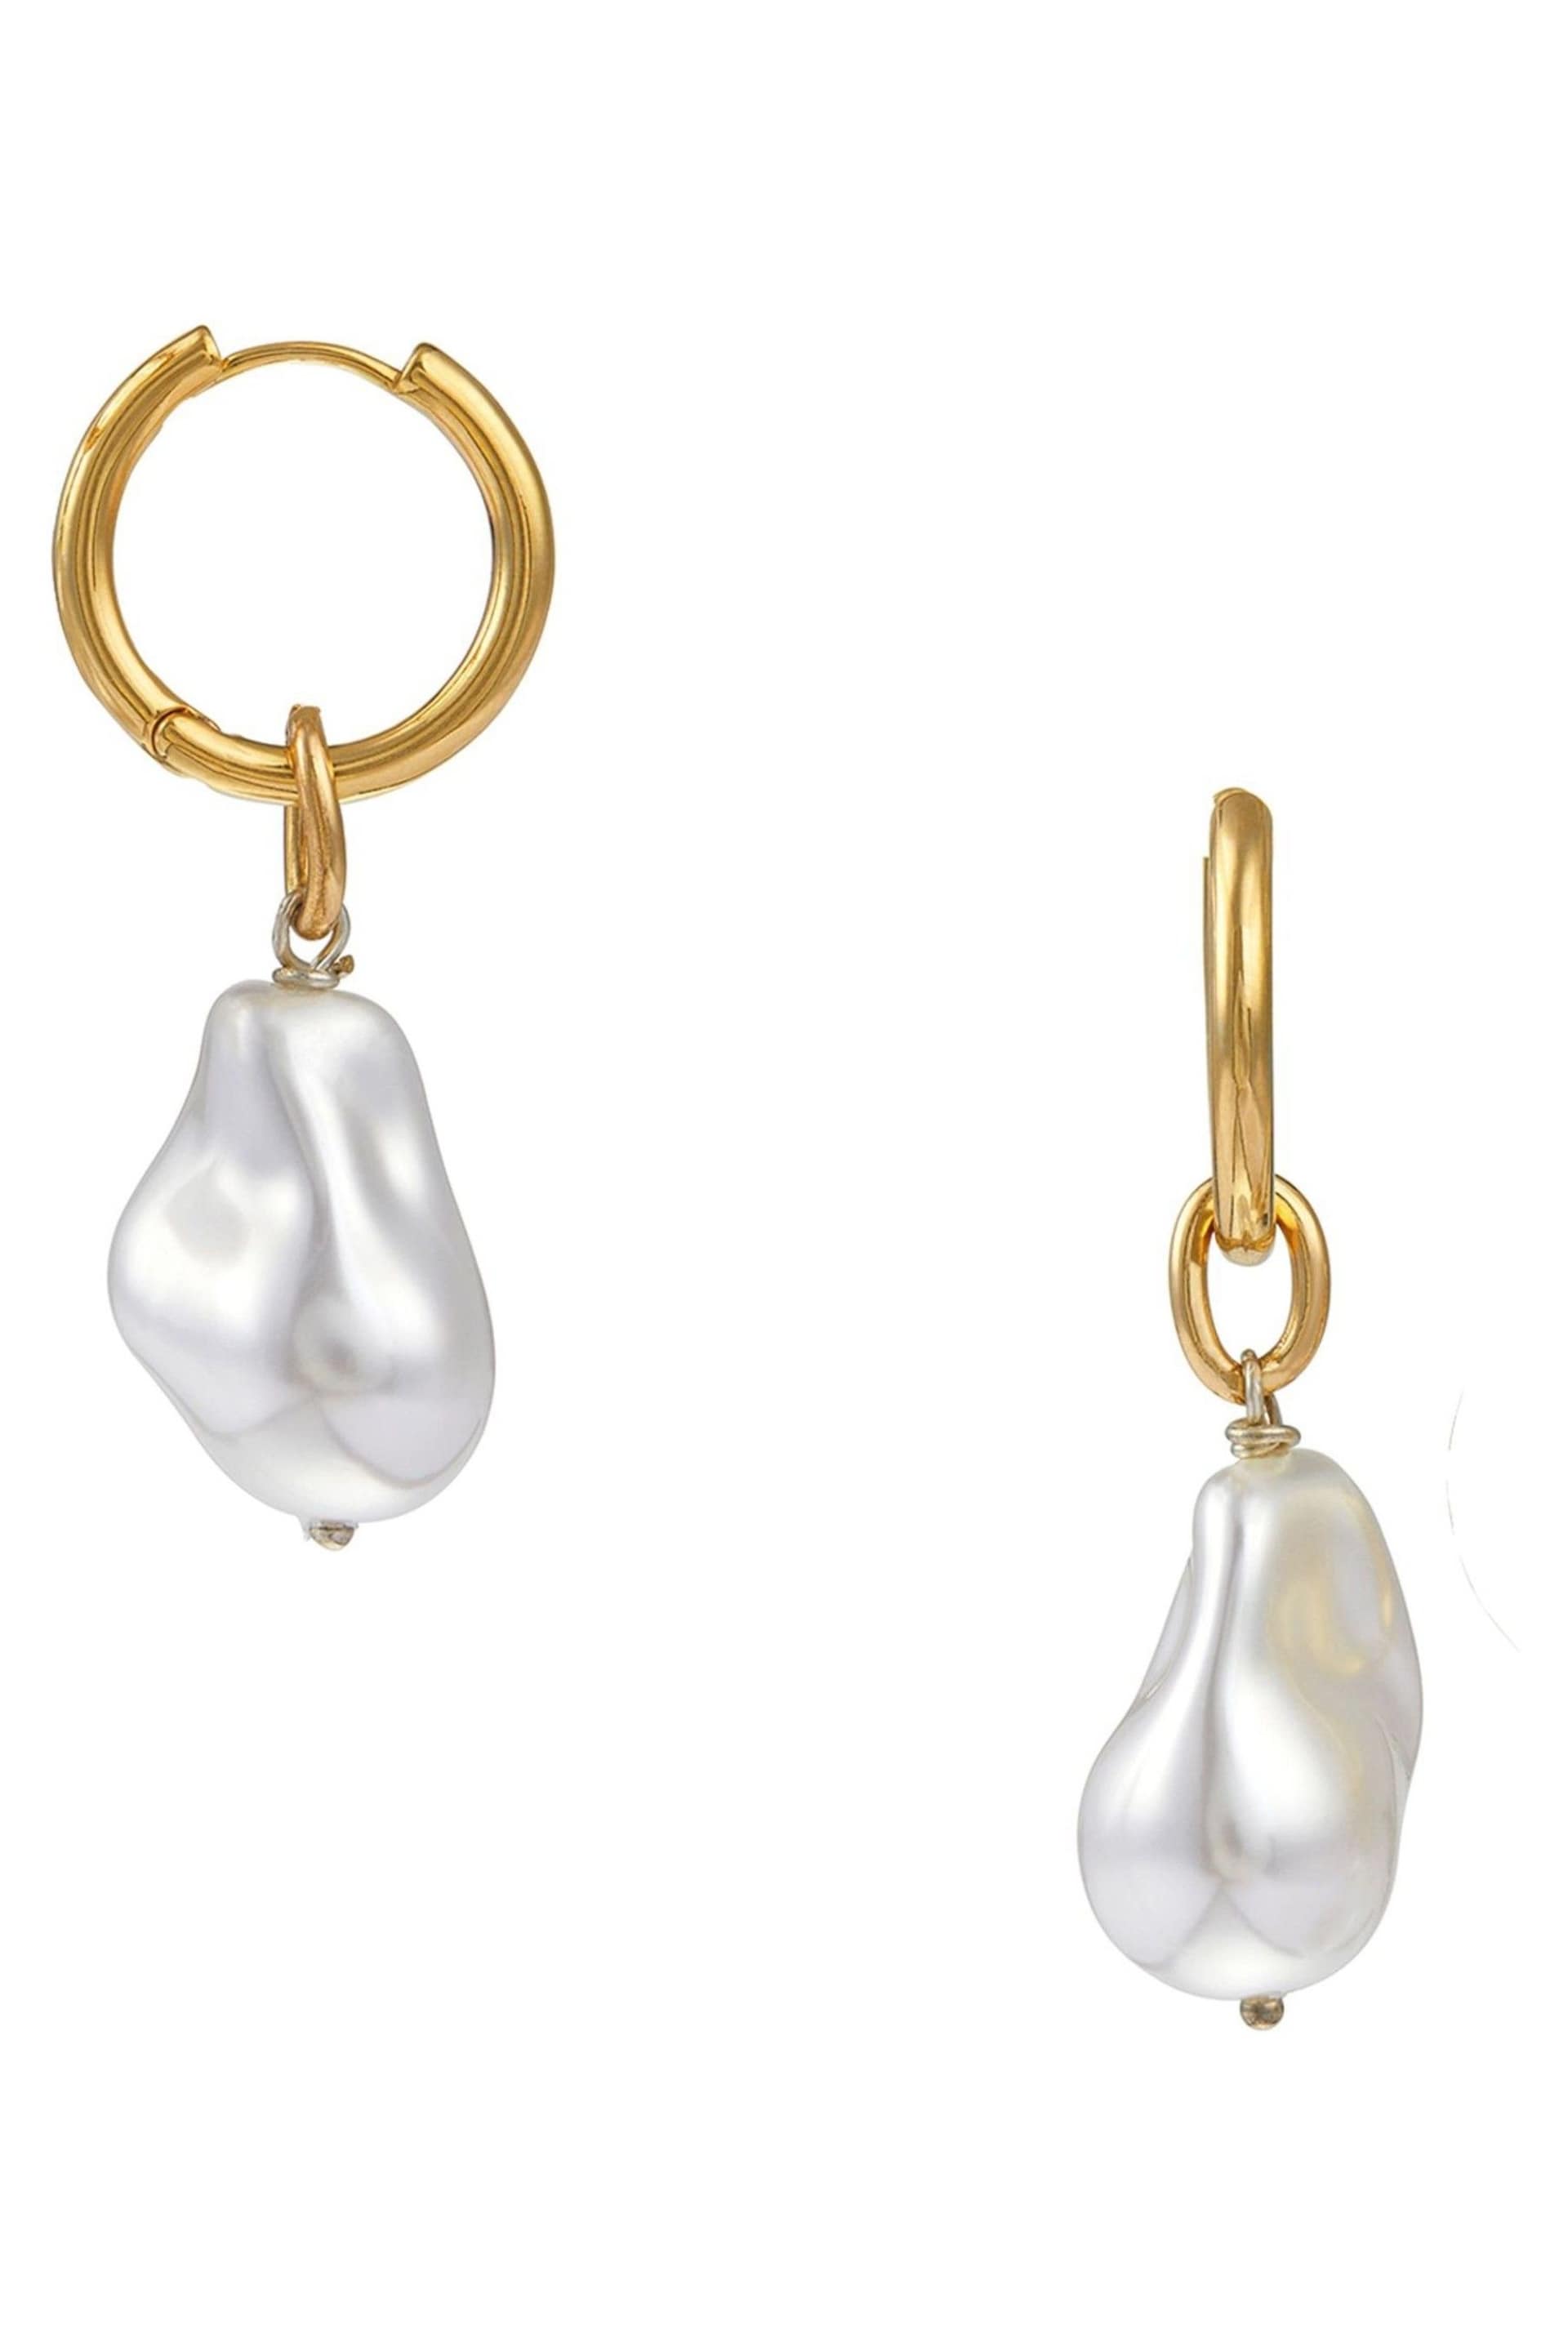 Orelia London Gold Plated Statement Pearl Drop Earrings - Image 1 of 2